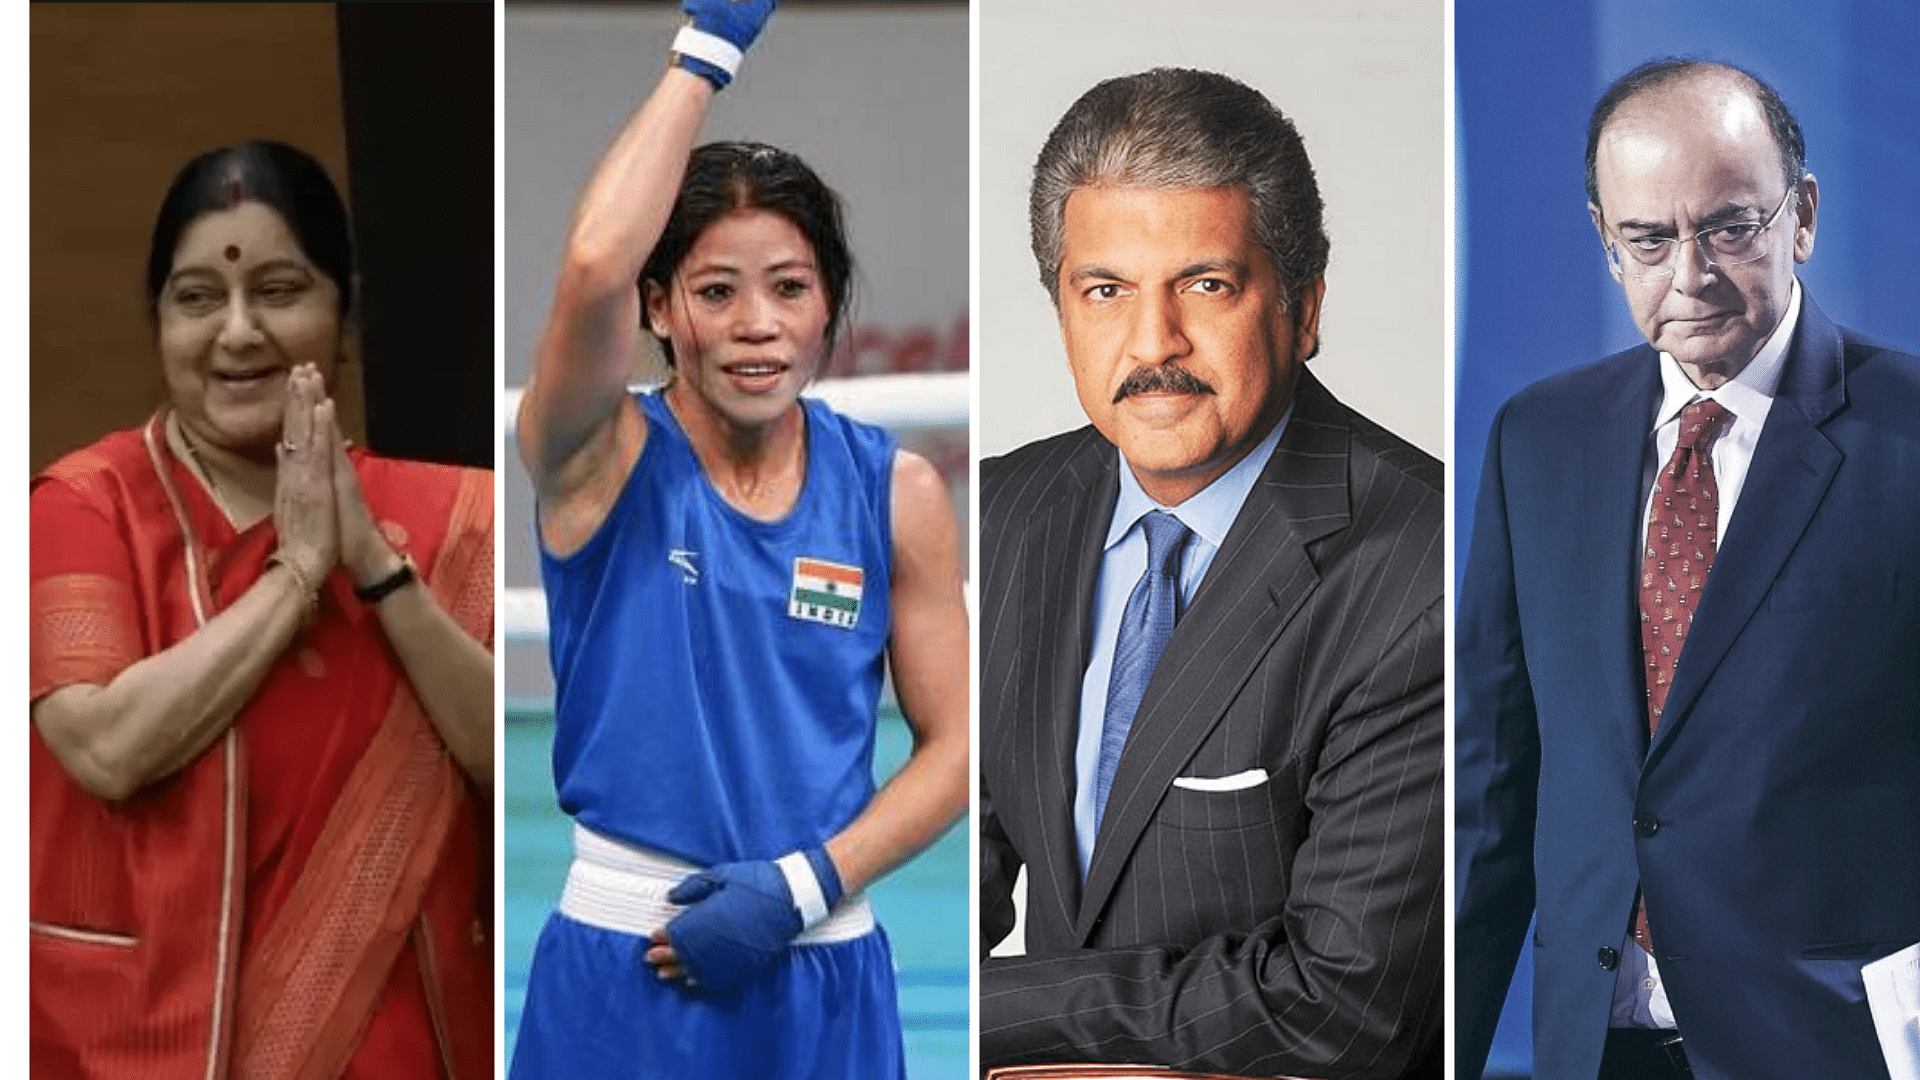 From left to right: Former External Affairs Minister Sushma Swaraj, World Champion boxer Mary Kom, billionaire businessman Anand Mahindra and former Finance Minister Arun Jaitley were among the winners of the Padma awards this year.